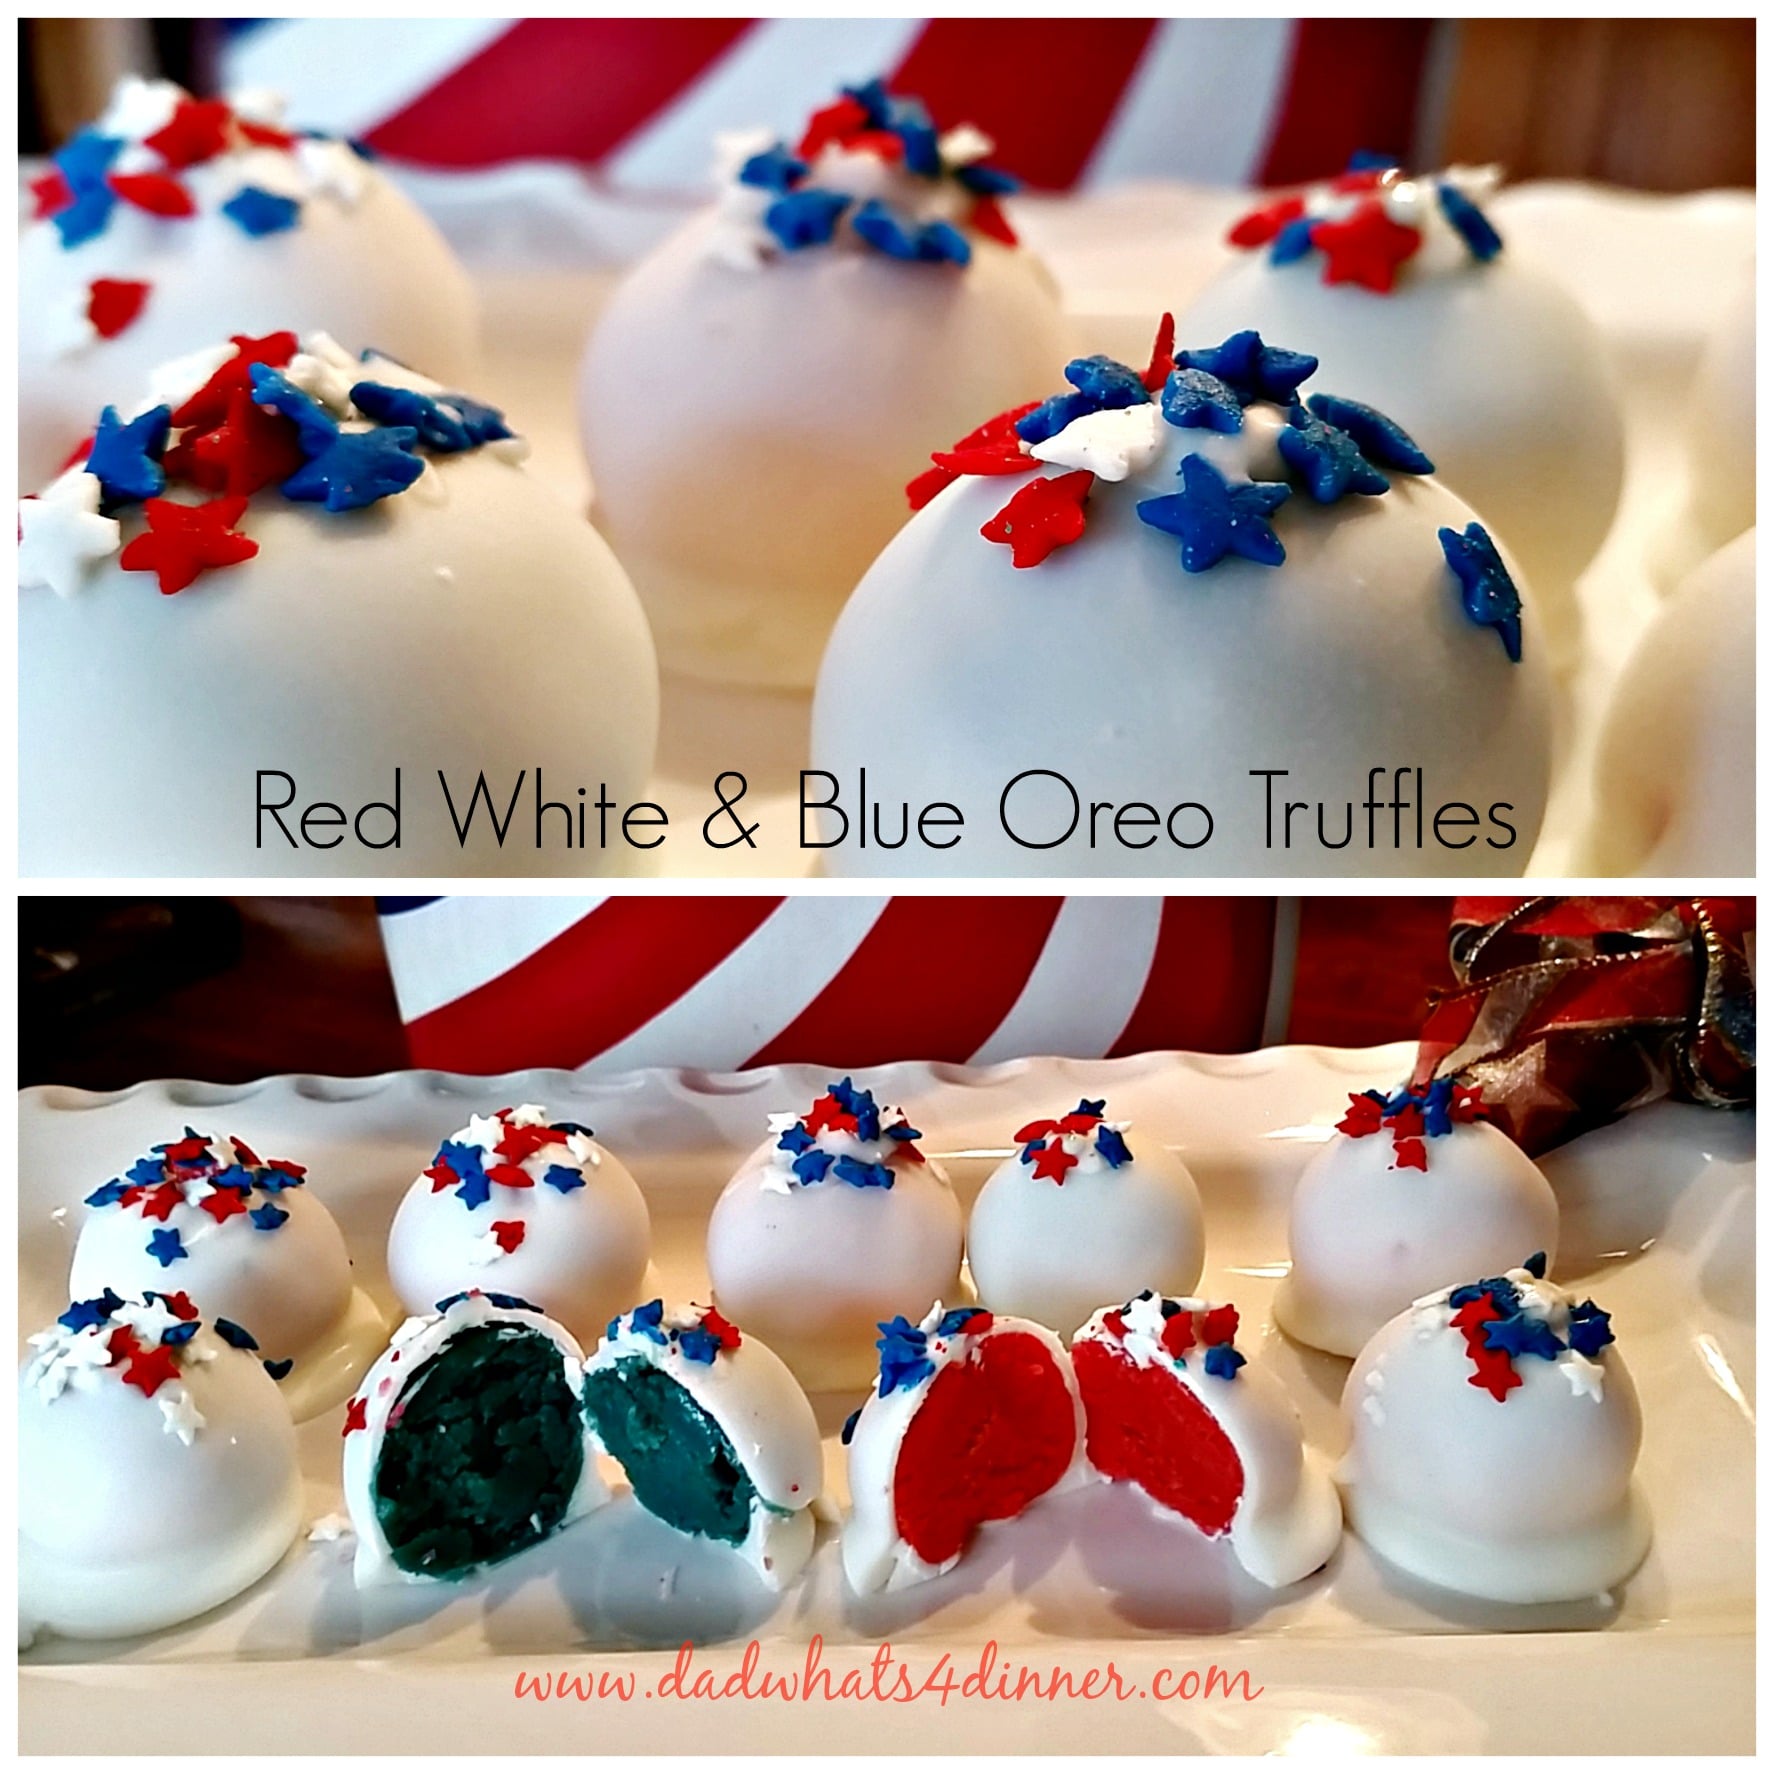 These Red White and Blue Oreo Truffles are a quick, no bake, easy dessert, for the summer cookout season.